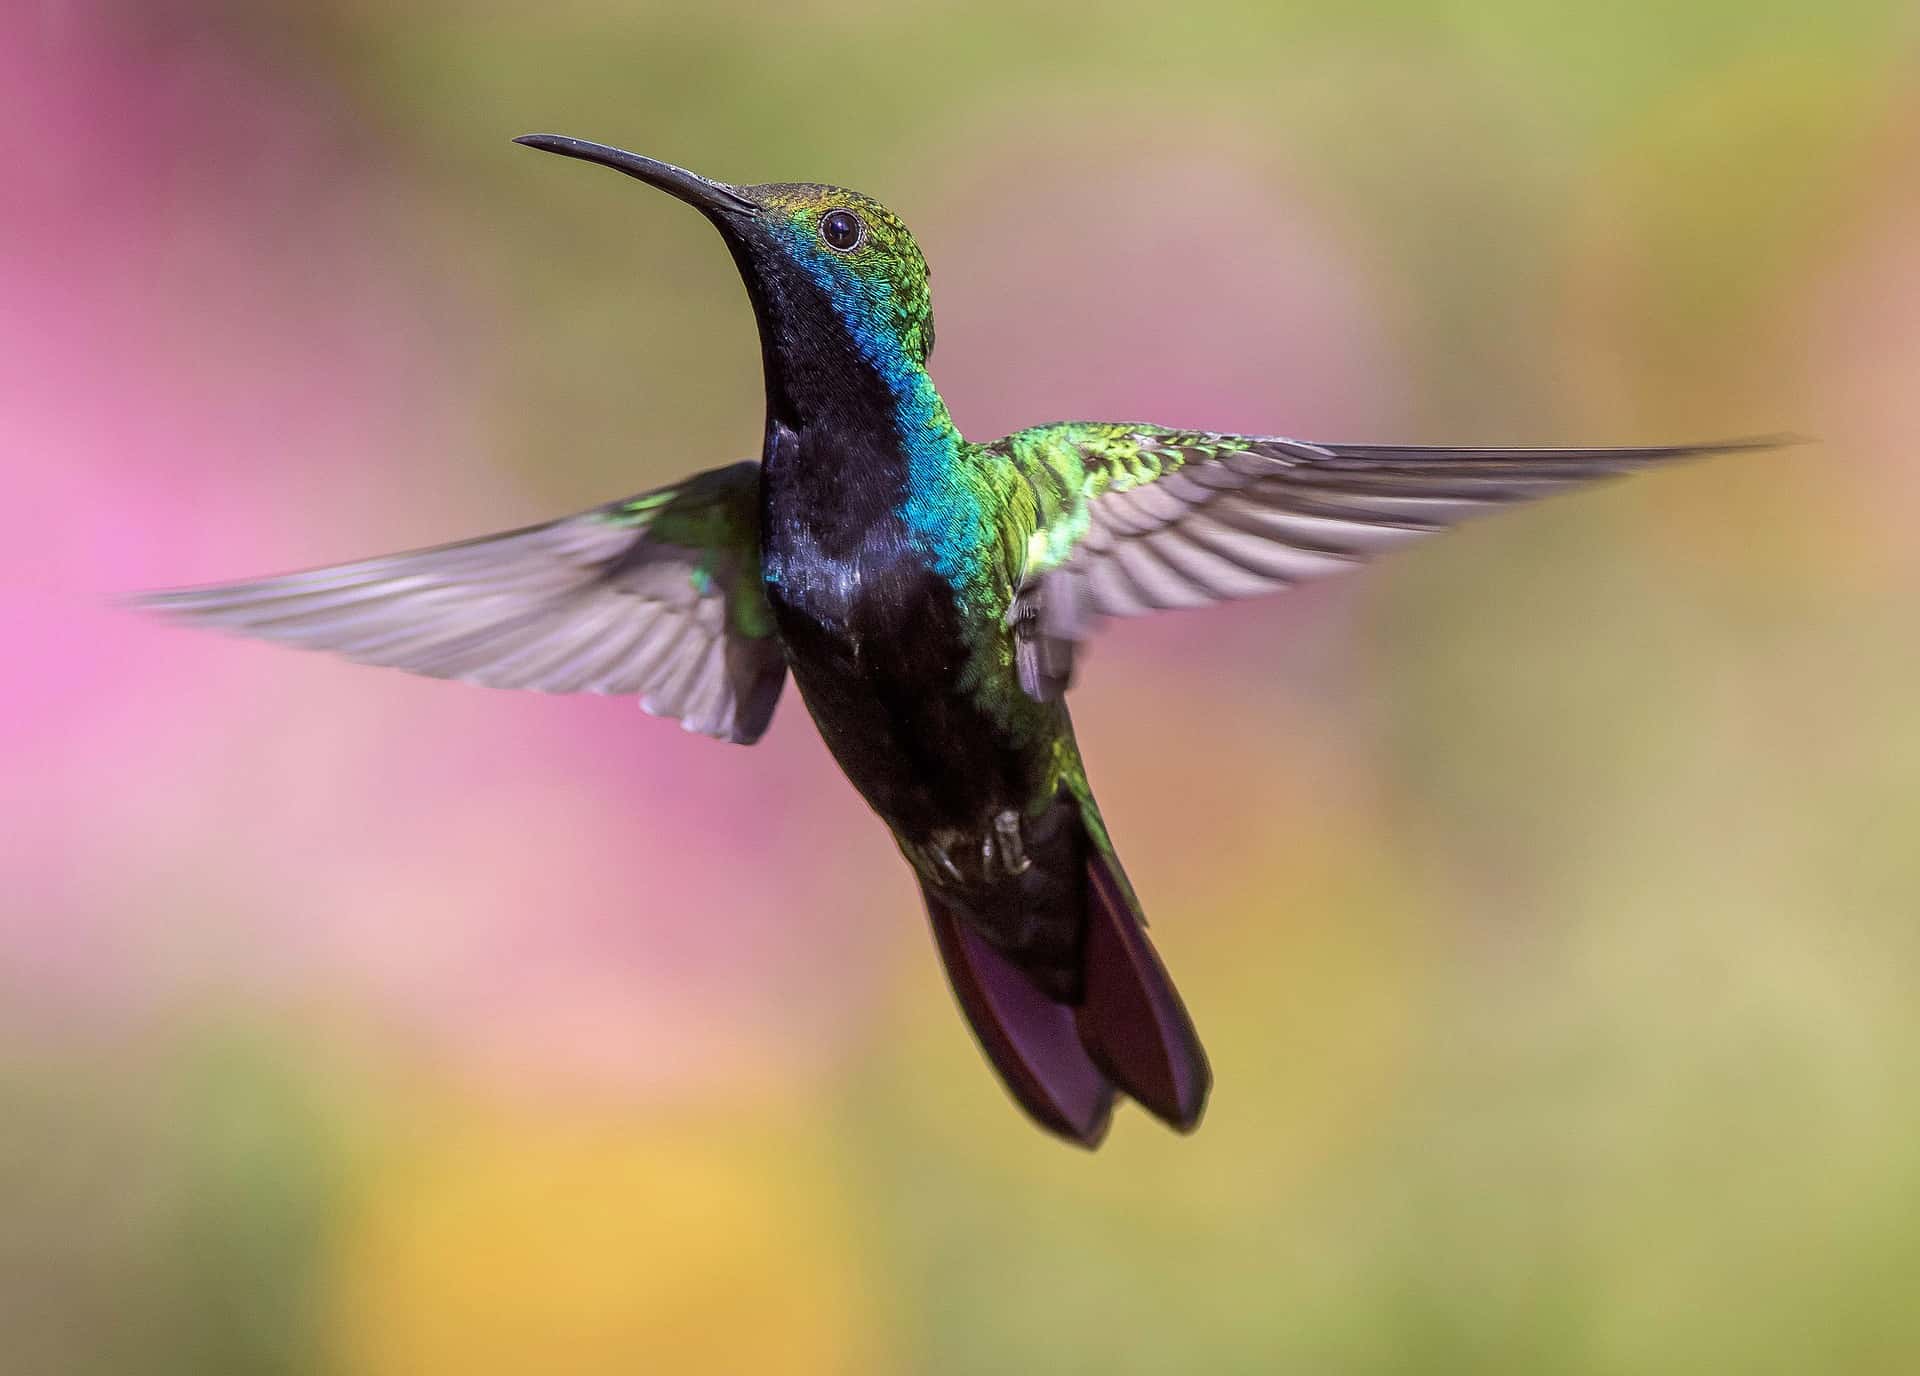 <p>A hummingbird’s heart beats as fast as 1,260 beats per minute. On cold nights, their heartbeat slows to 50-180 beats per minute, when they experience a hibernation-like state.</p>